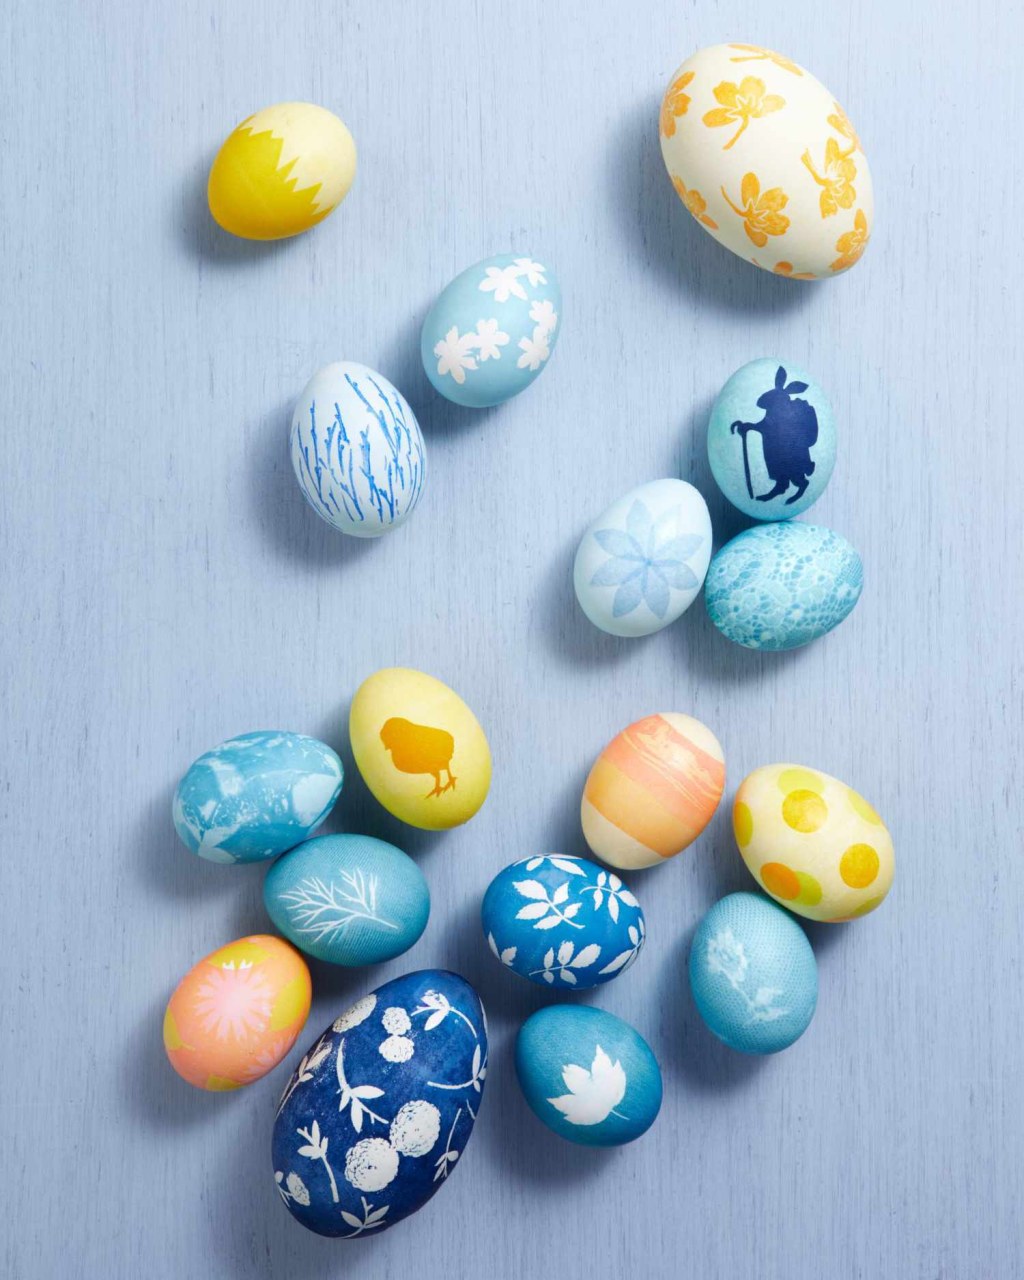 innovative egg decorating ideas - of Our Best Easter Egg Decorating Ideas and Designs